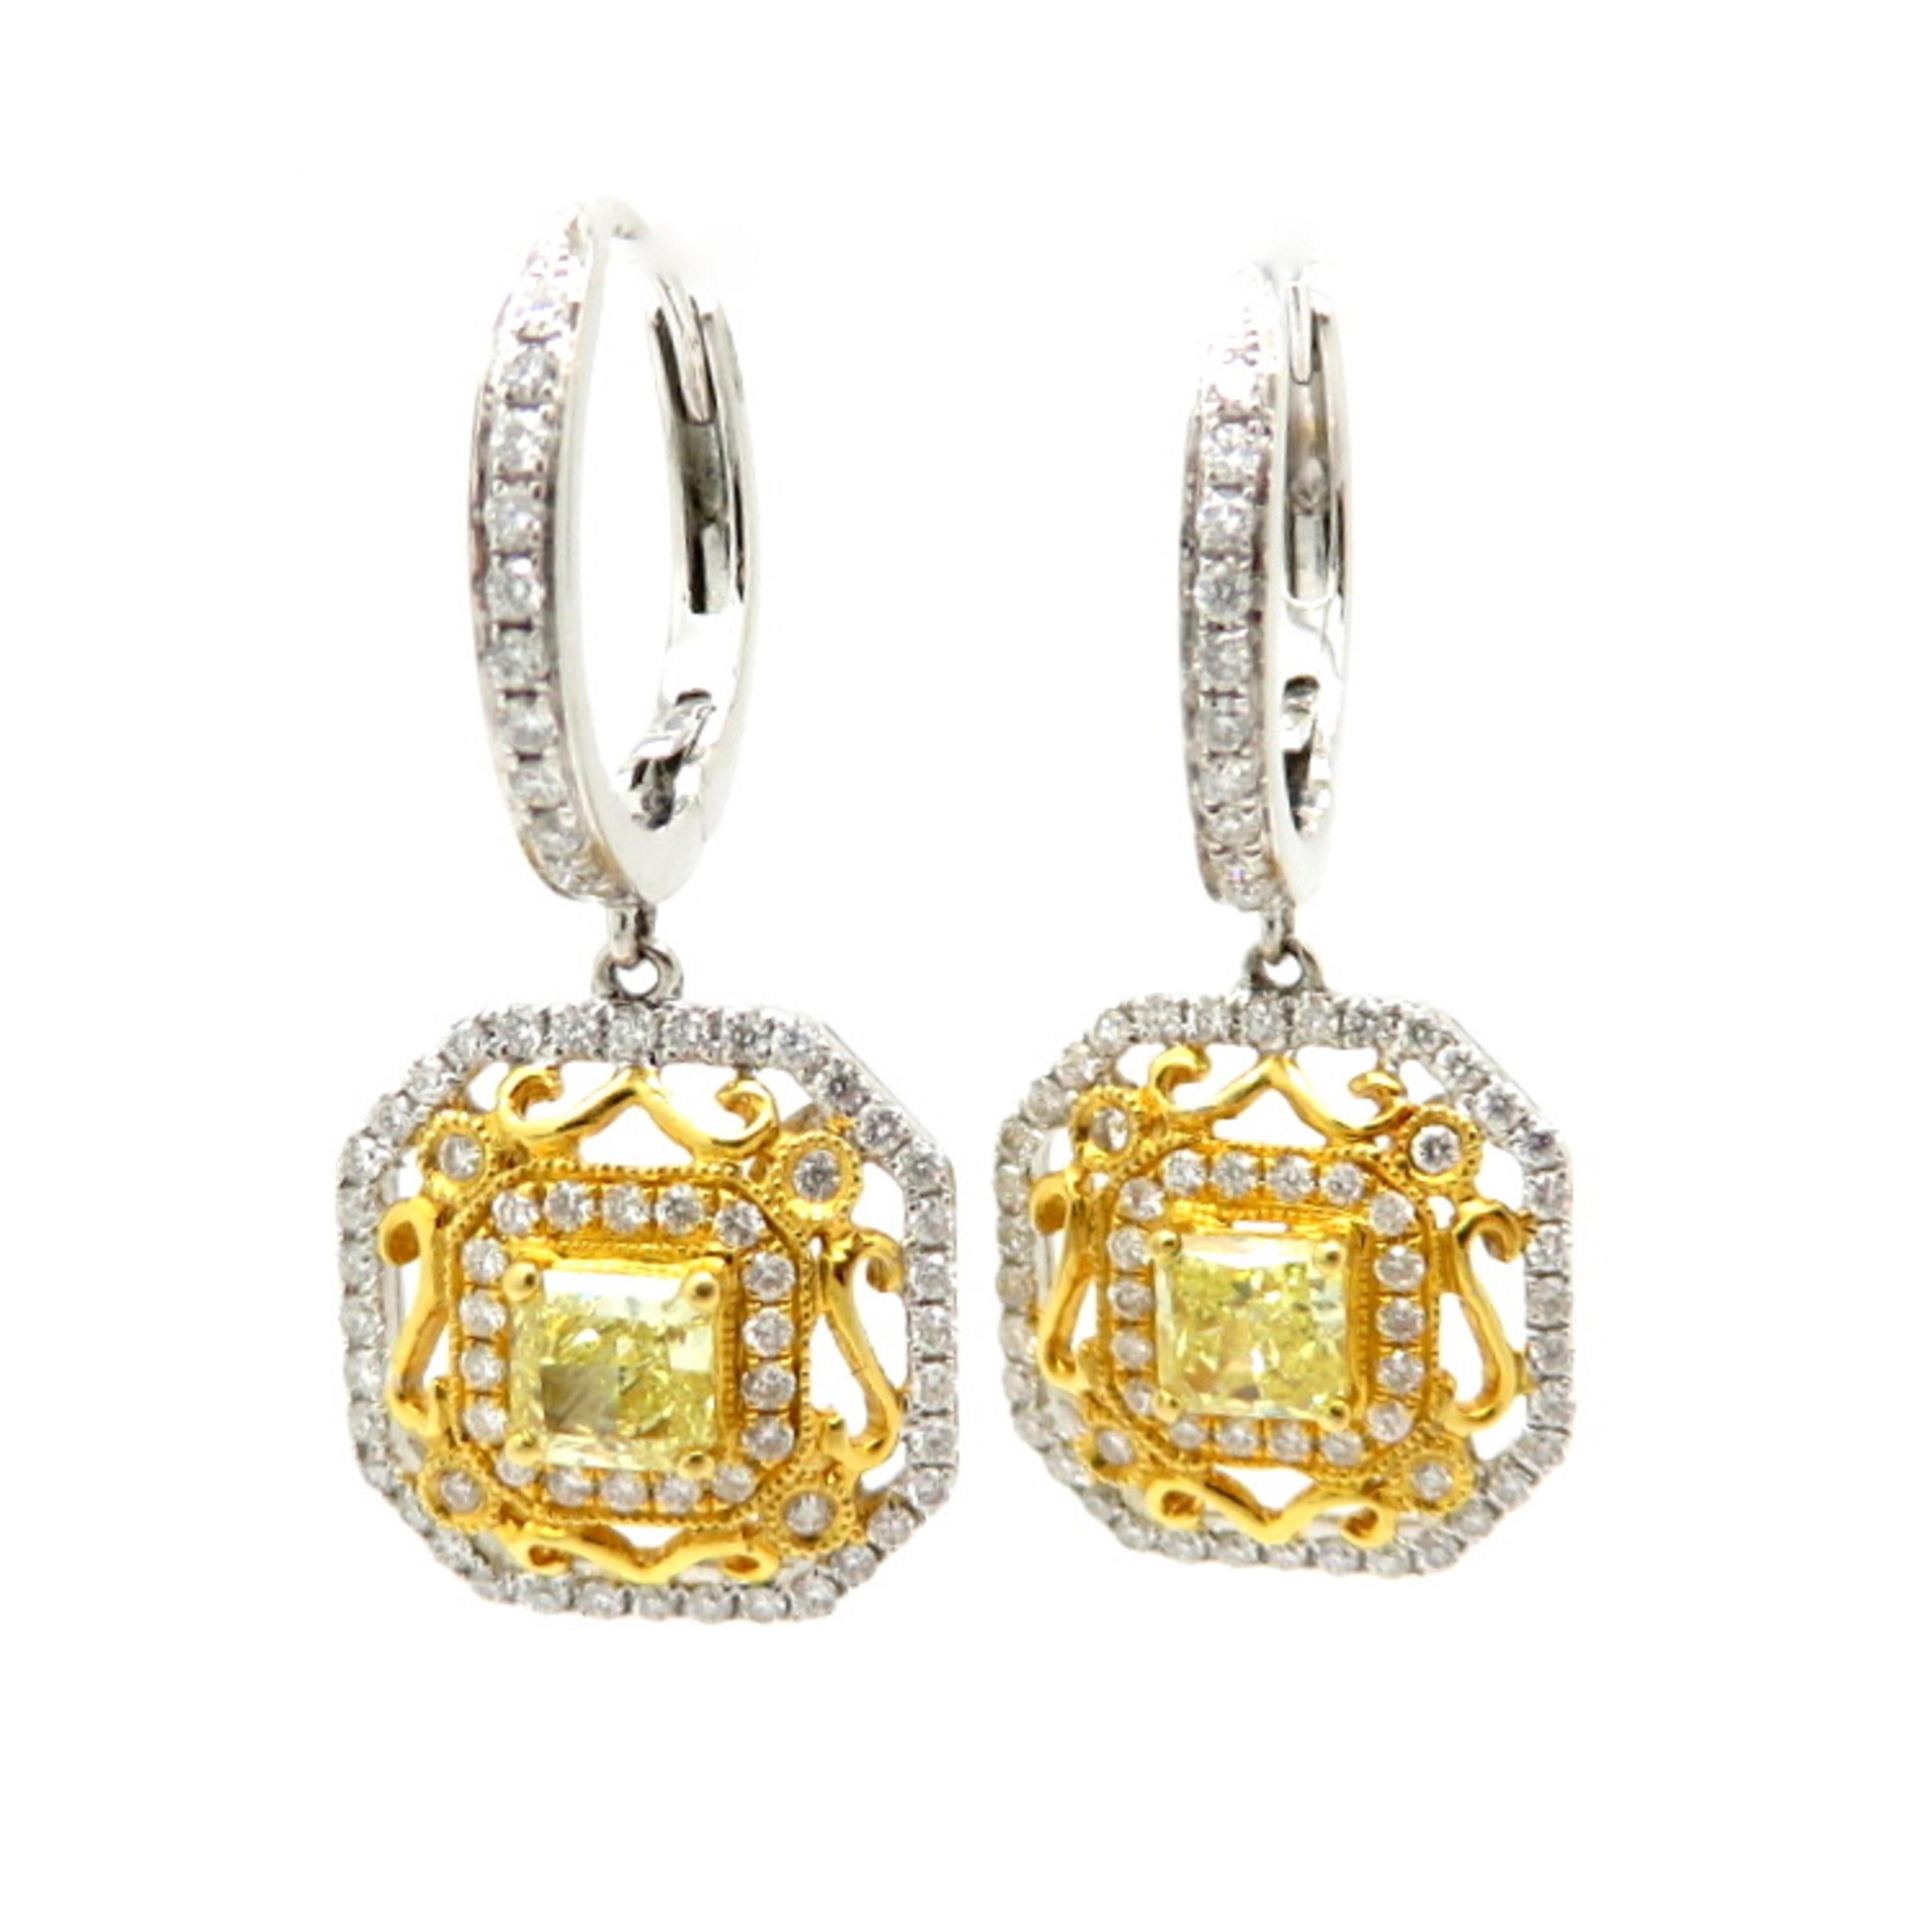 For sale is a lovely pair of Fancy Yellow Radiant Cut and White Diamond Dangle Earrings crafted out of 18K White and Yellow Gold!
Each earring centers one radiant cut fancy yellow diamond with SI1 Clarity, weighing a combined total of 0.86 carats.